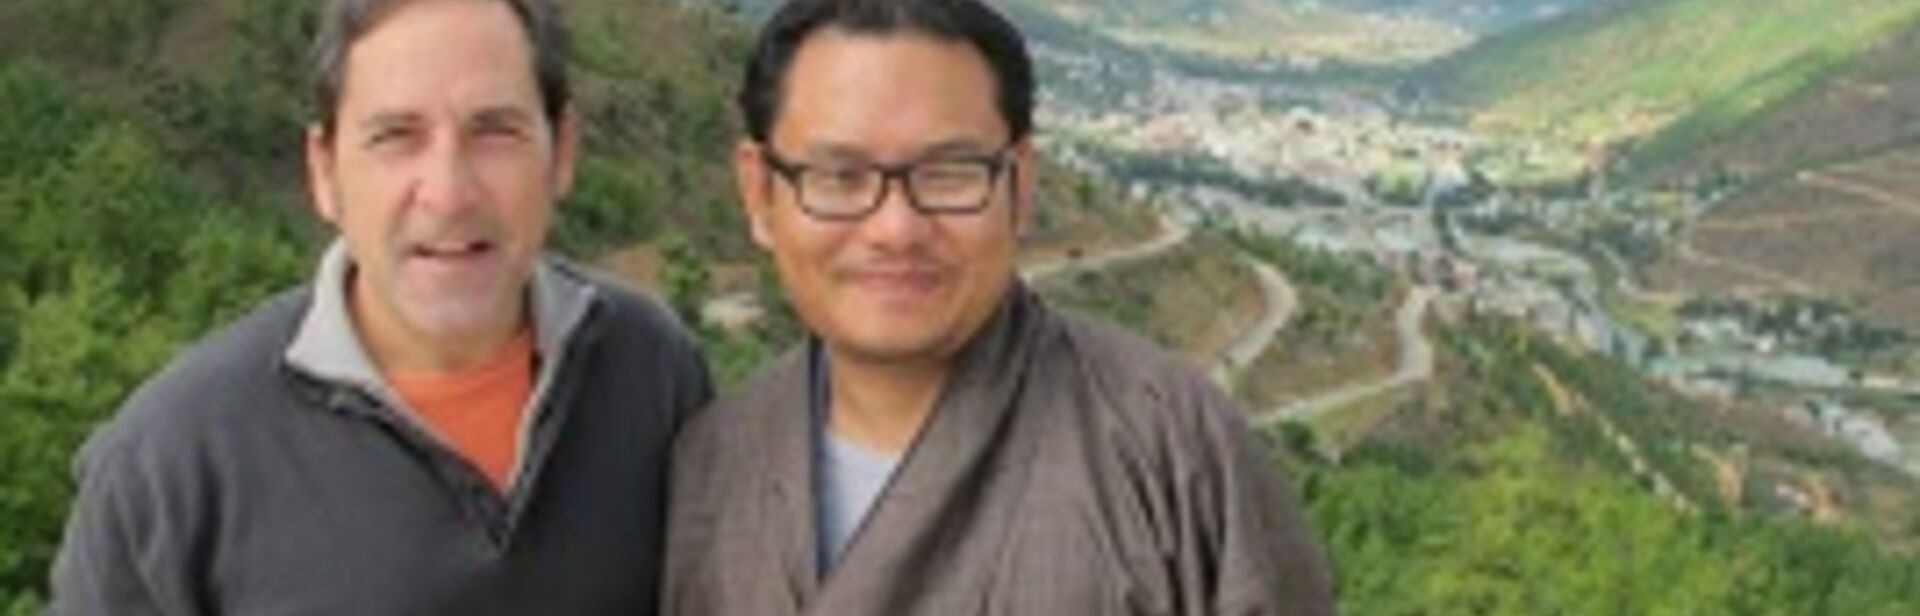 New Forum in Bhutan Supports Journalists Covering the Environment